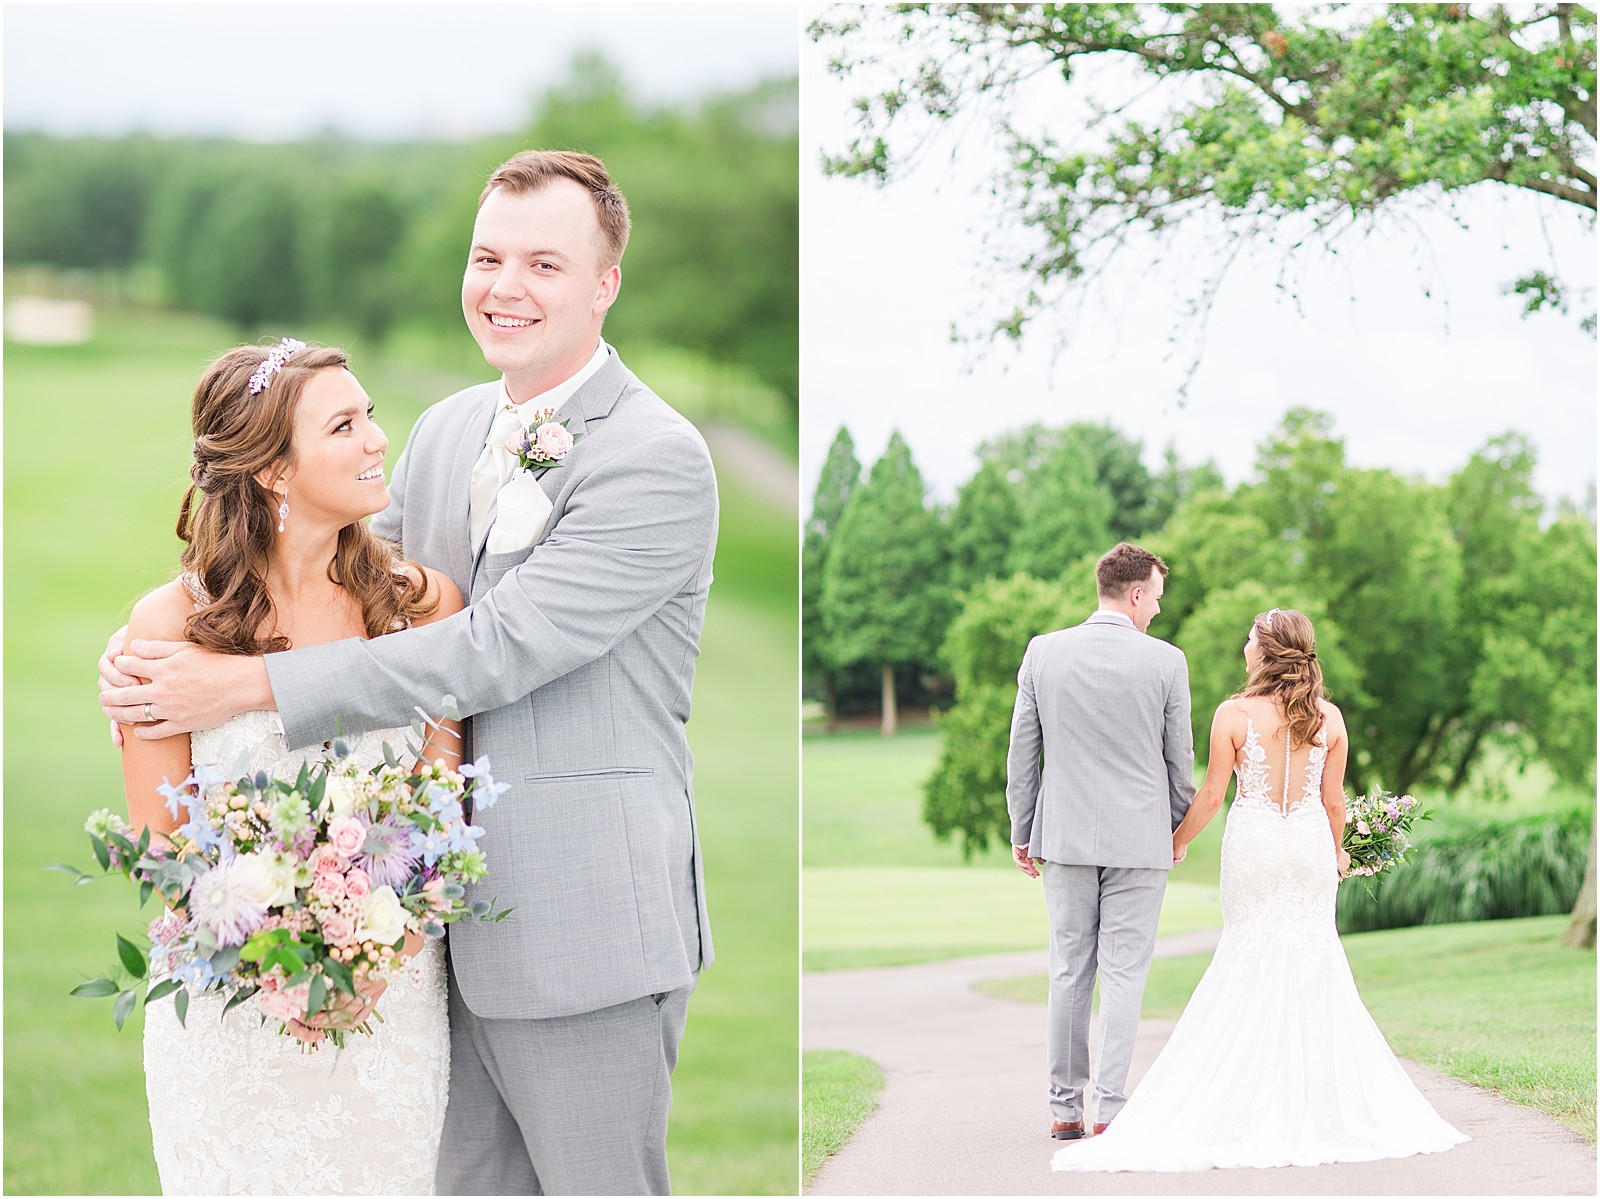 An Evansville County Club Wedding | Abby and Stratton 057.jpg